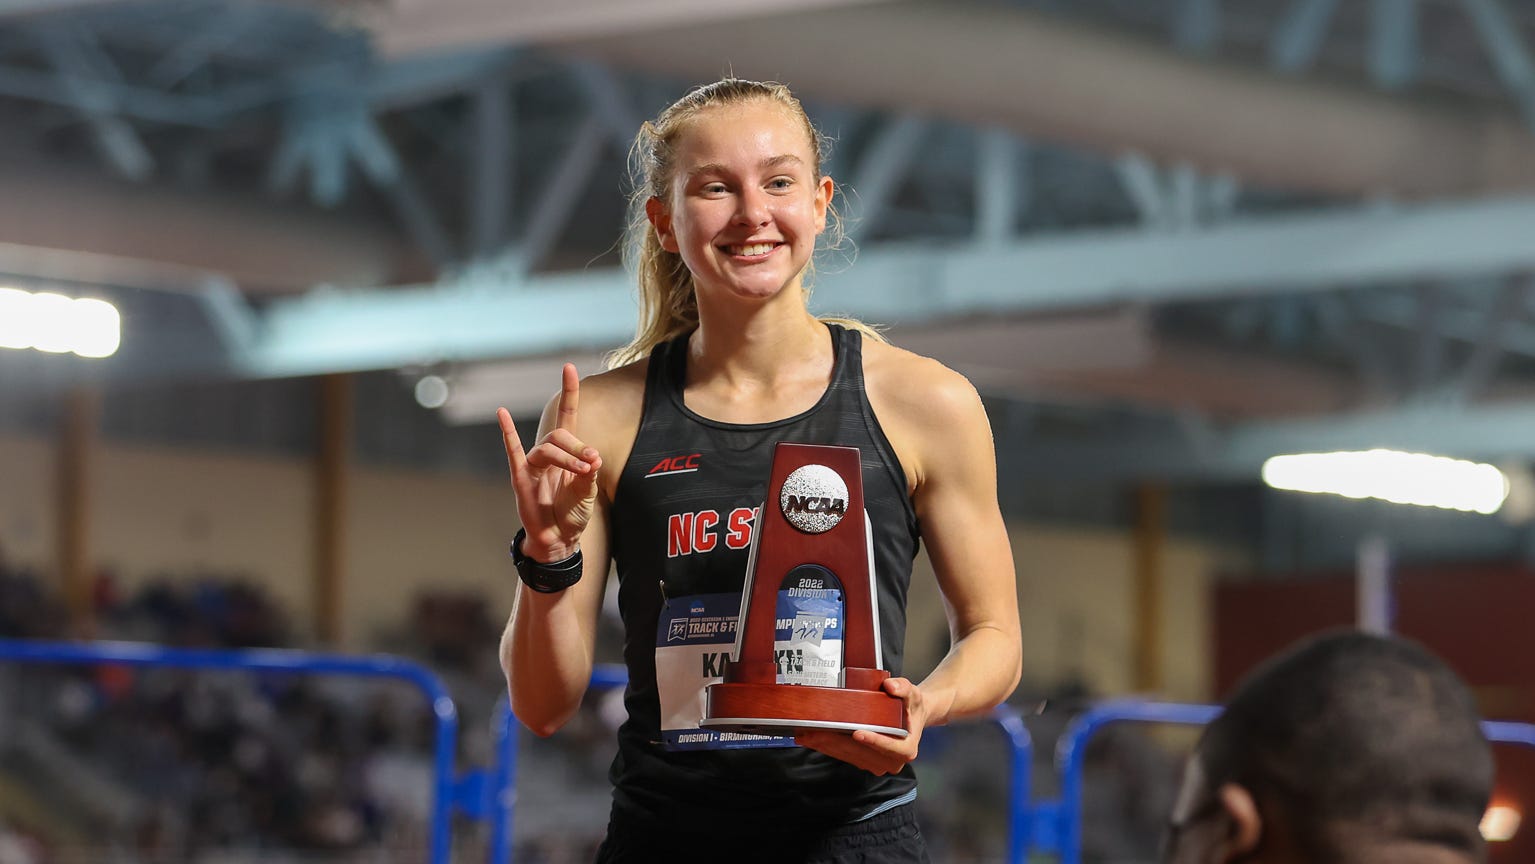 Katelyn Tuohy takes silver in NCAA women's track & field championships